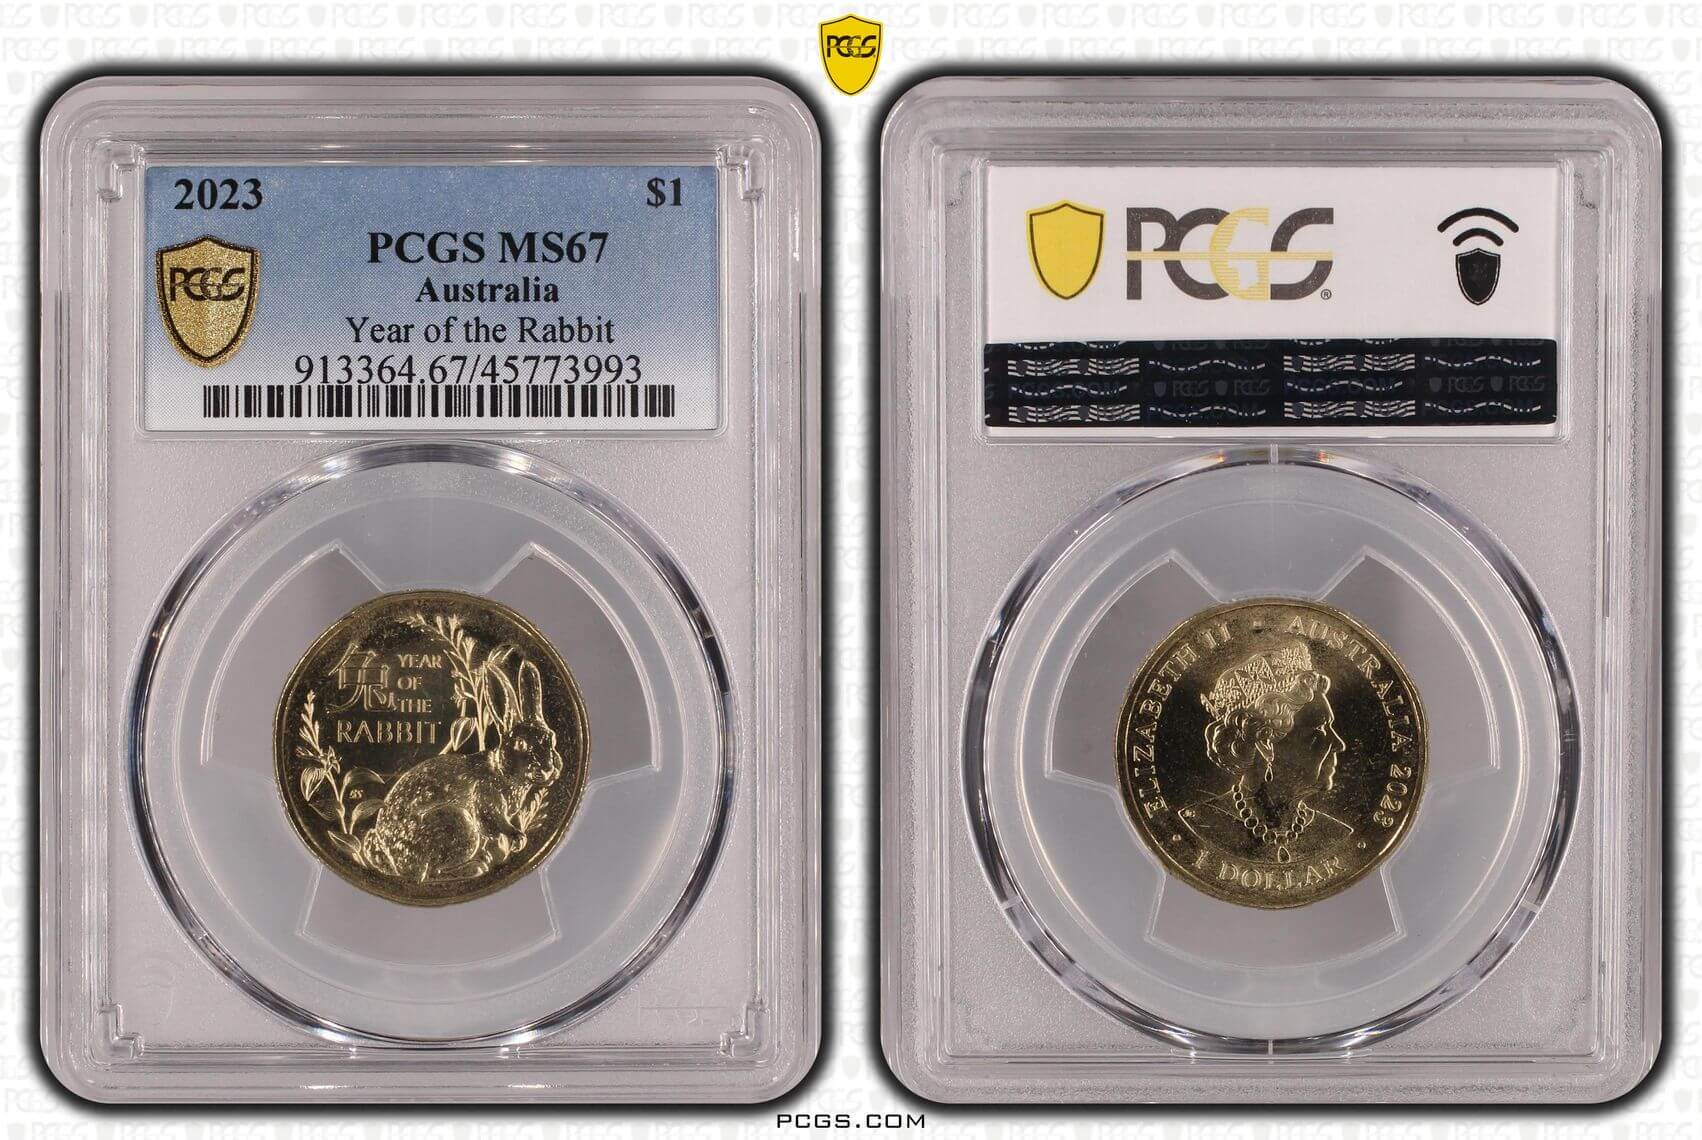 2023 Year of the Rabbit $1 PCGS - MS67